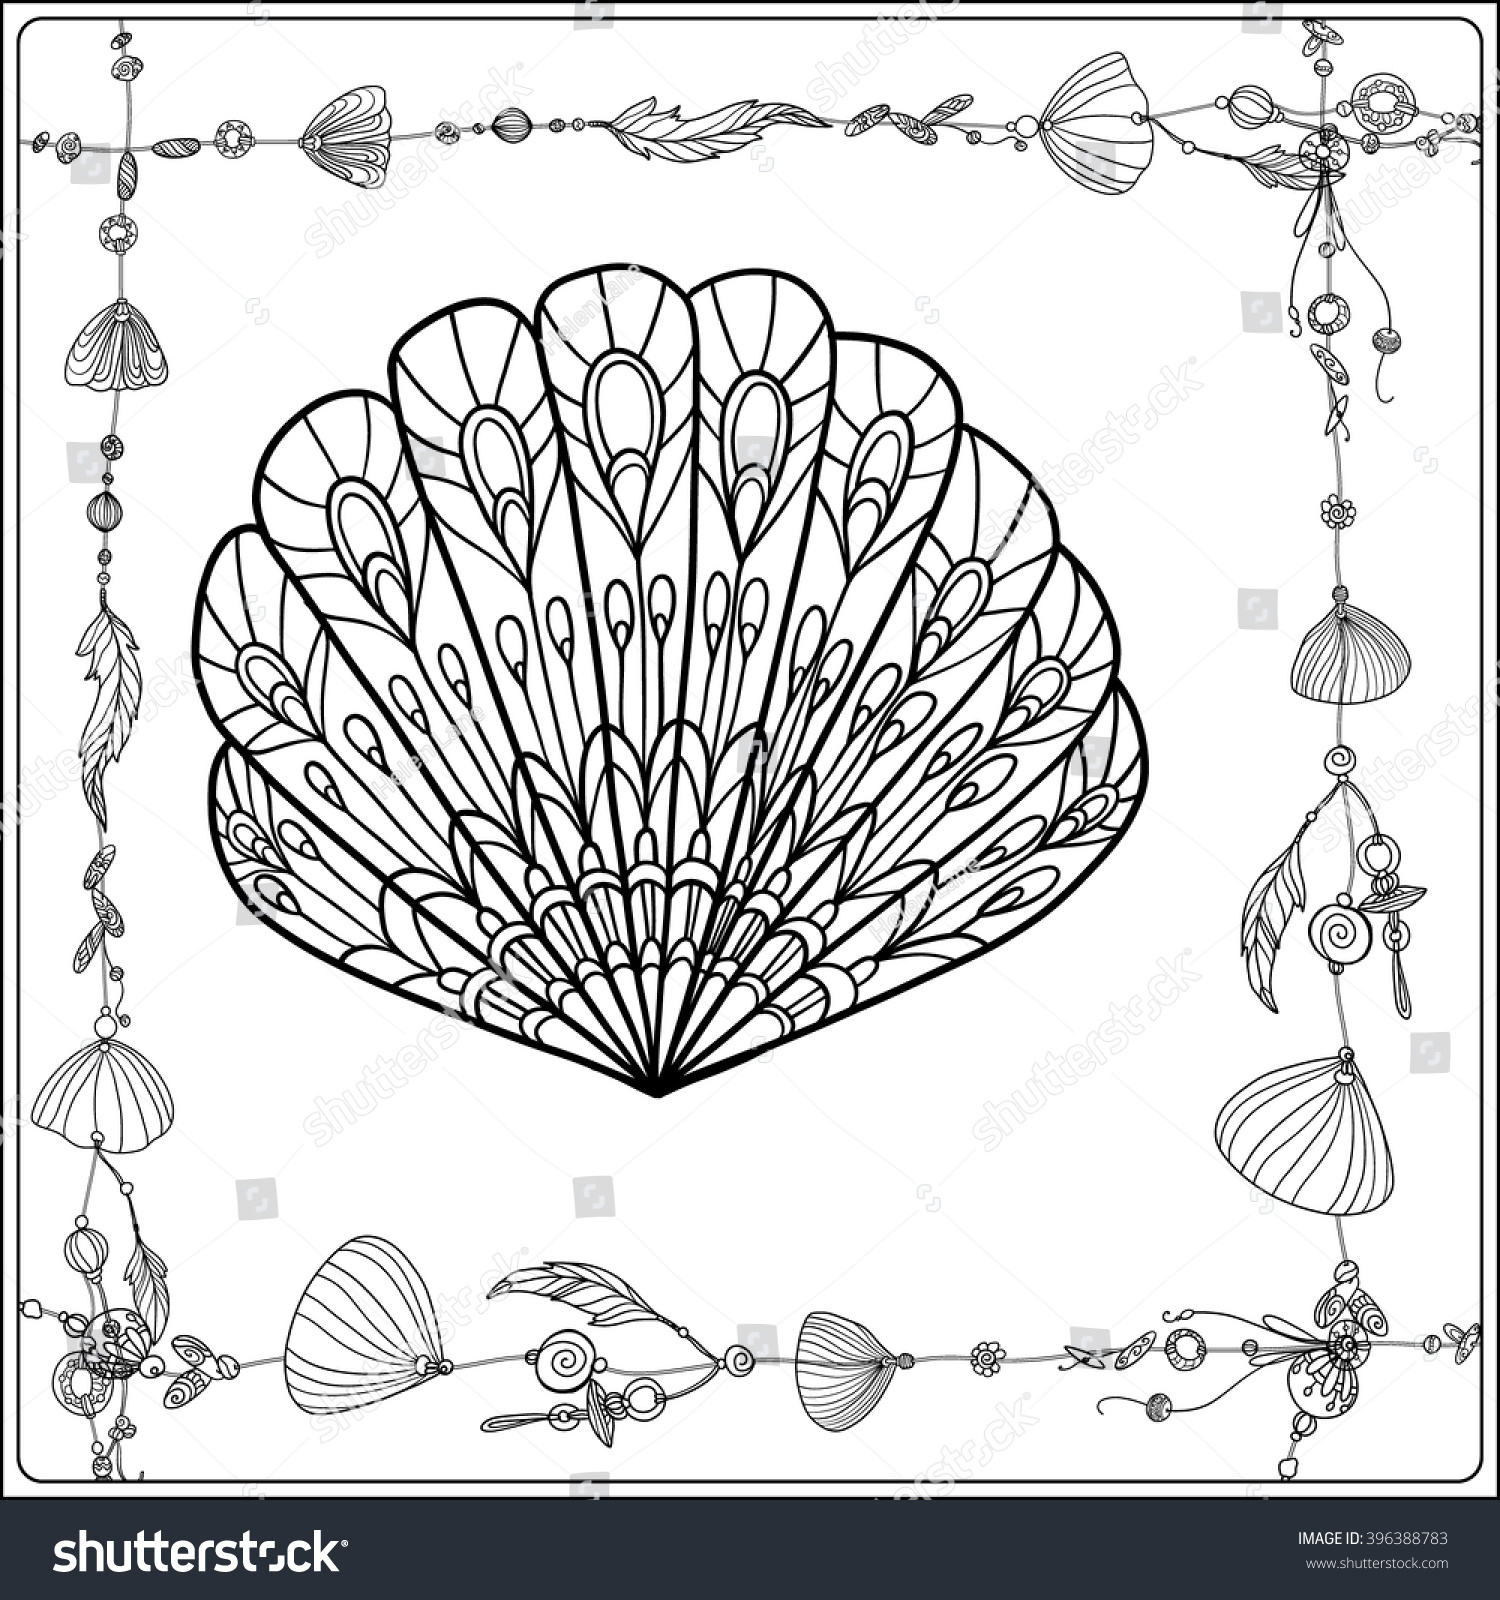 Adult coloring page with sea shells in boho style Outline drawing Vector illustration